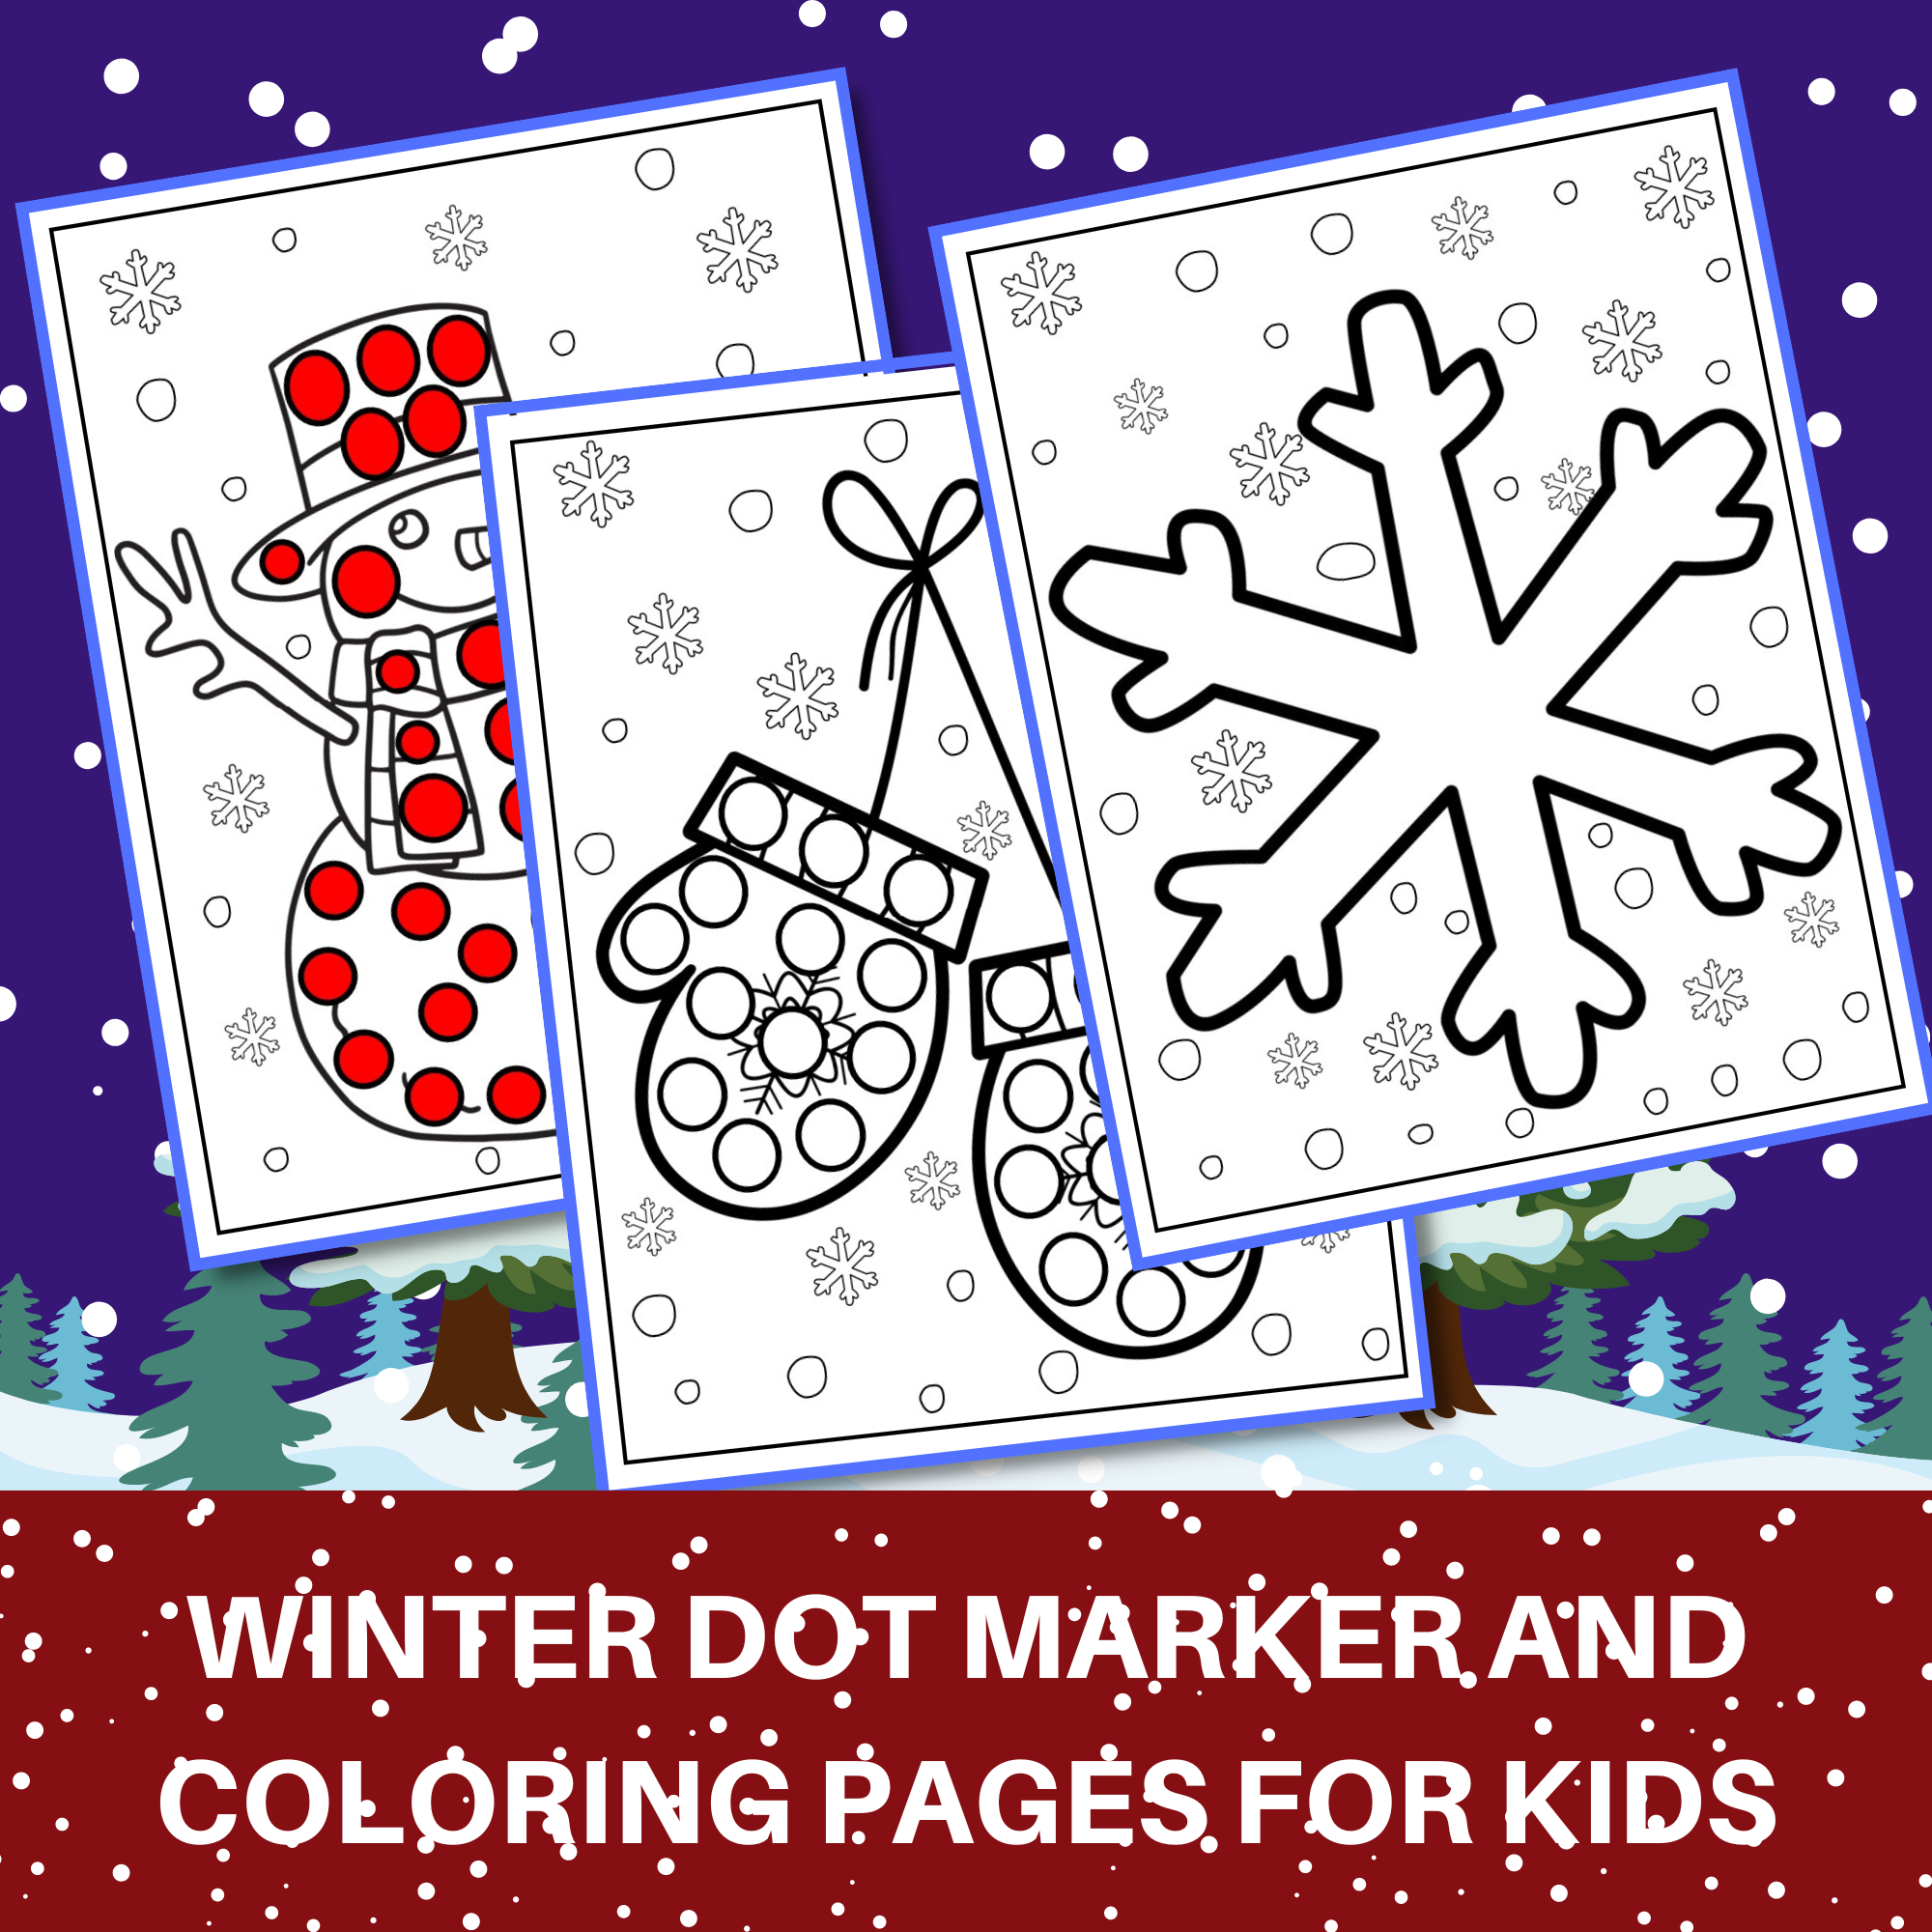 Winter dot marker activity and coloring pages printable made by teachers